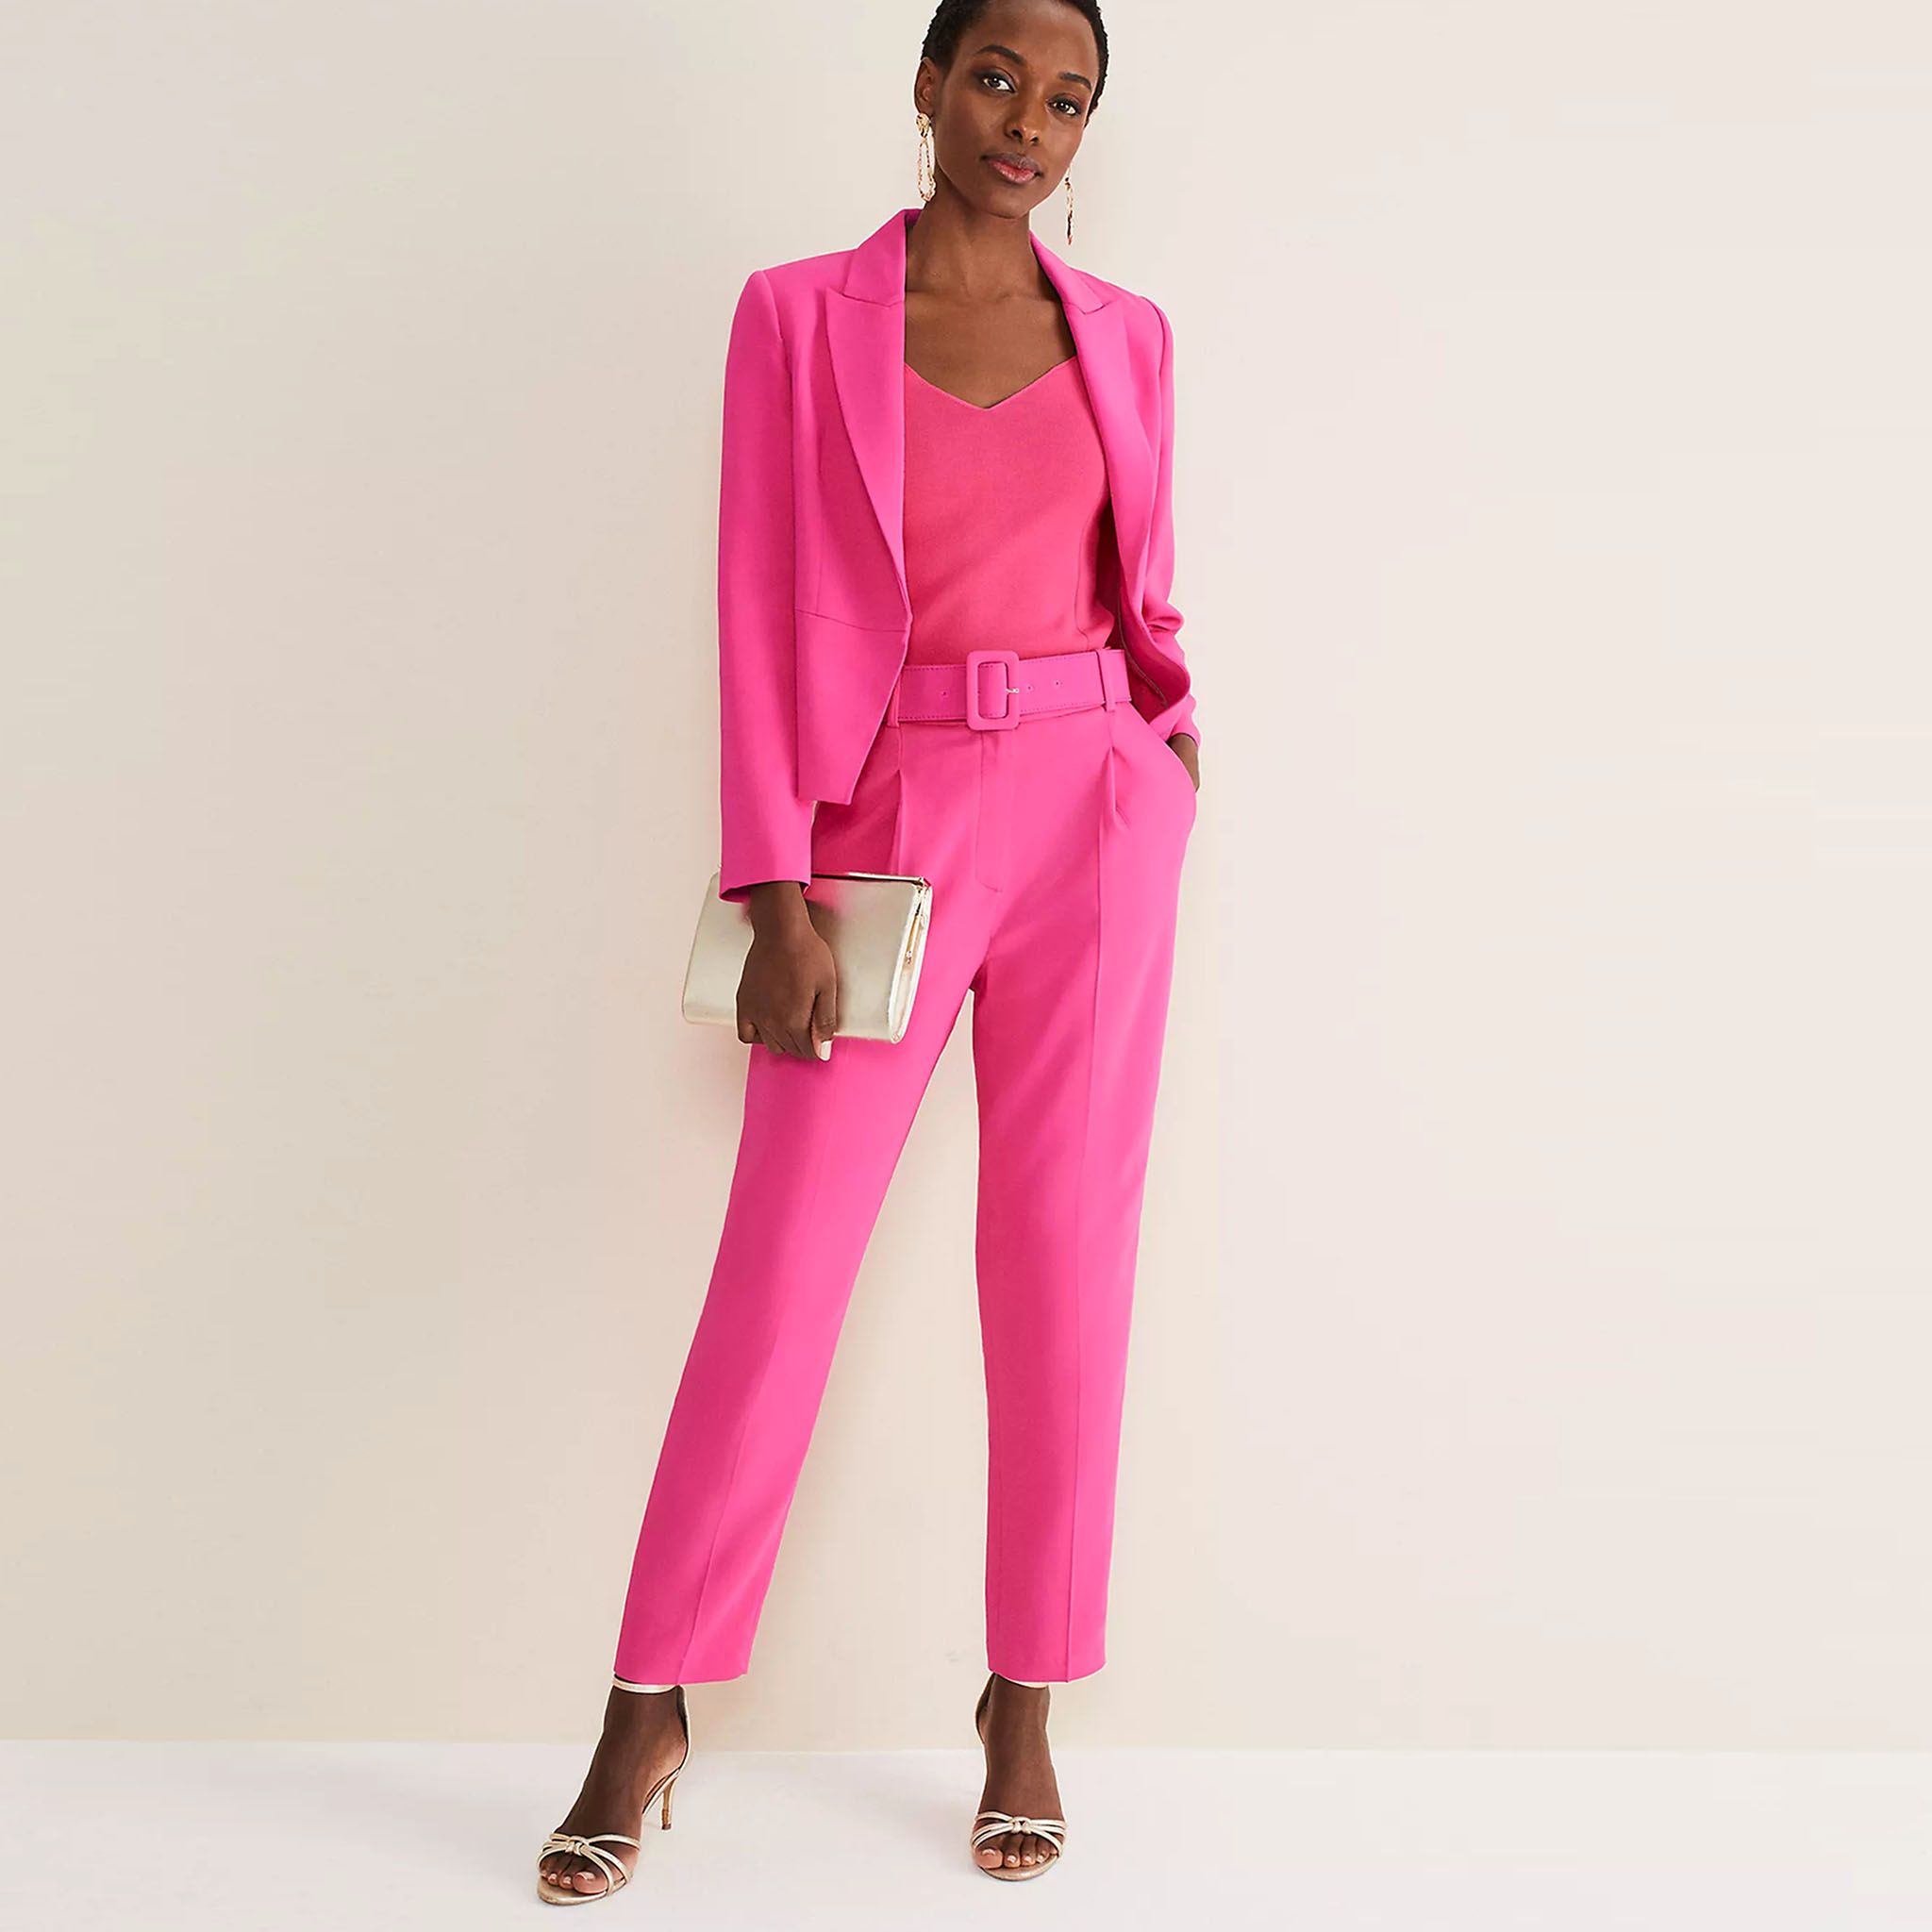 trouser suits for female wedding guests